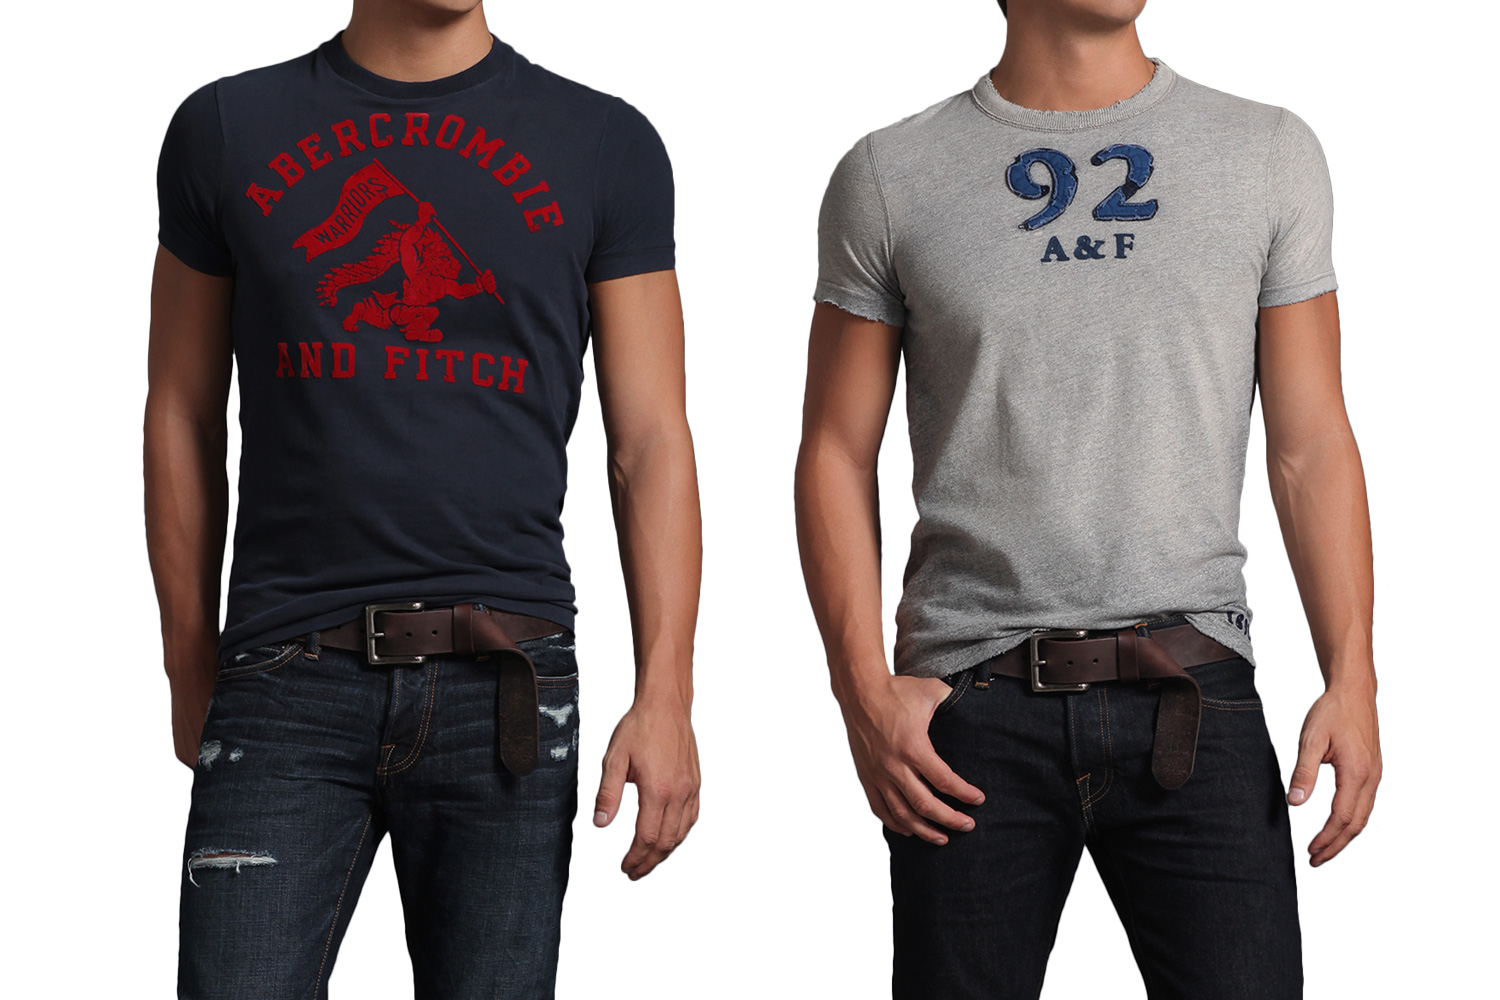 ABERCROMBIE_and_FITCH_MENS_graphic_tees_fashion.jpg